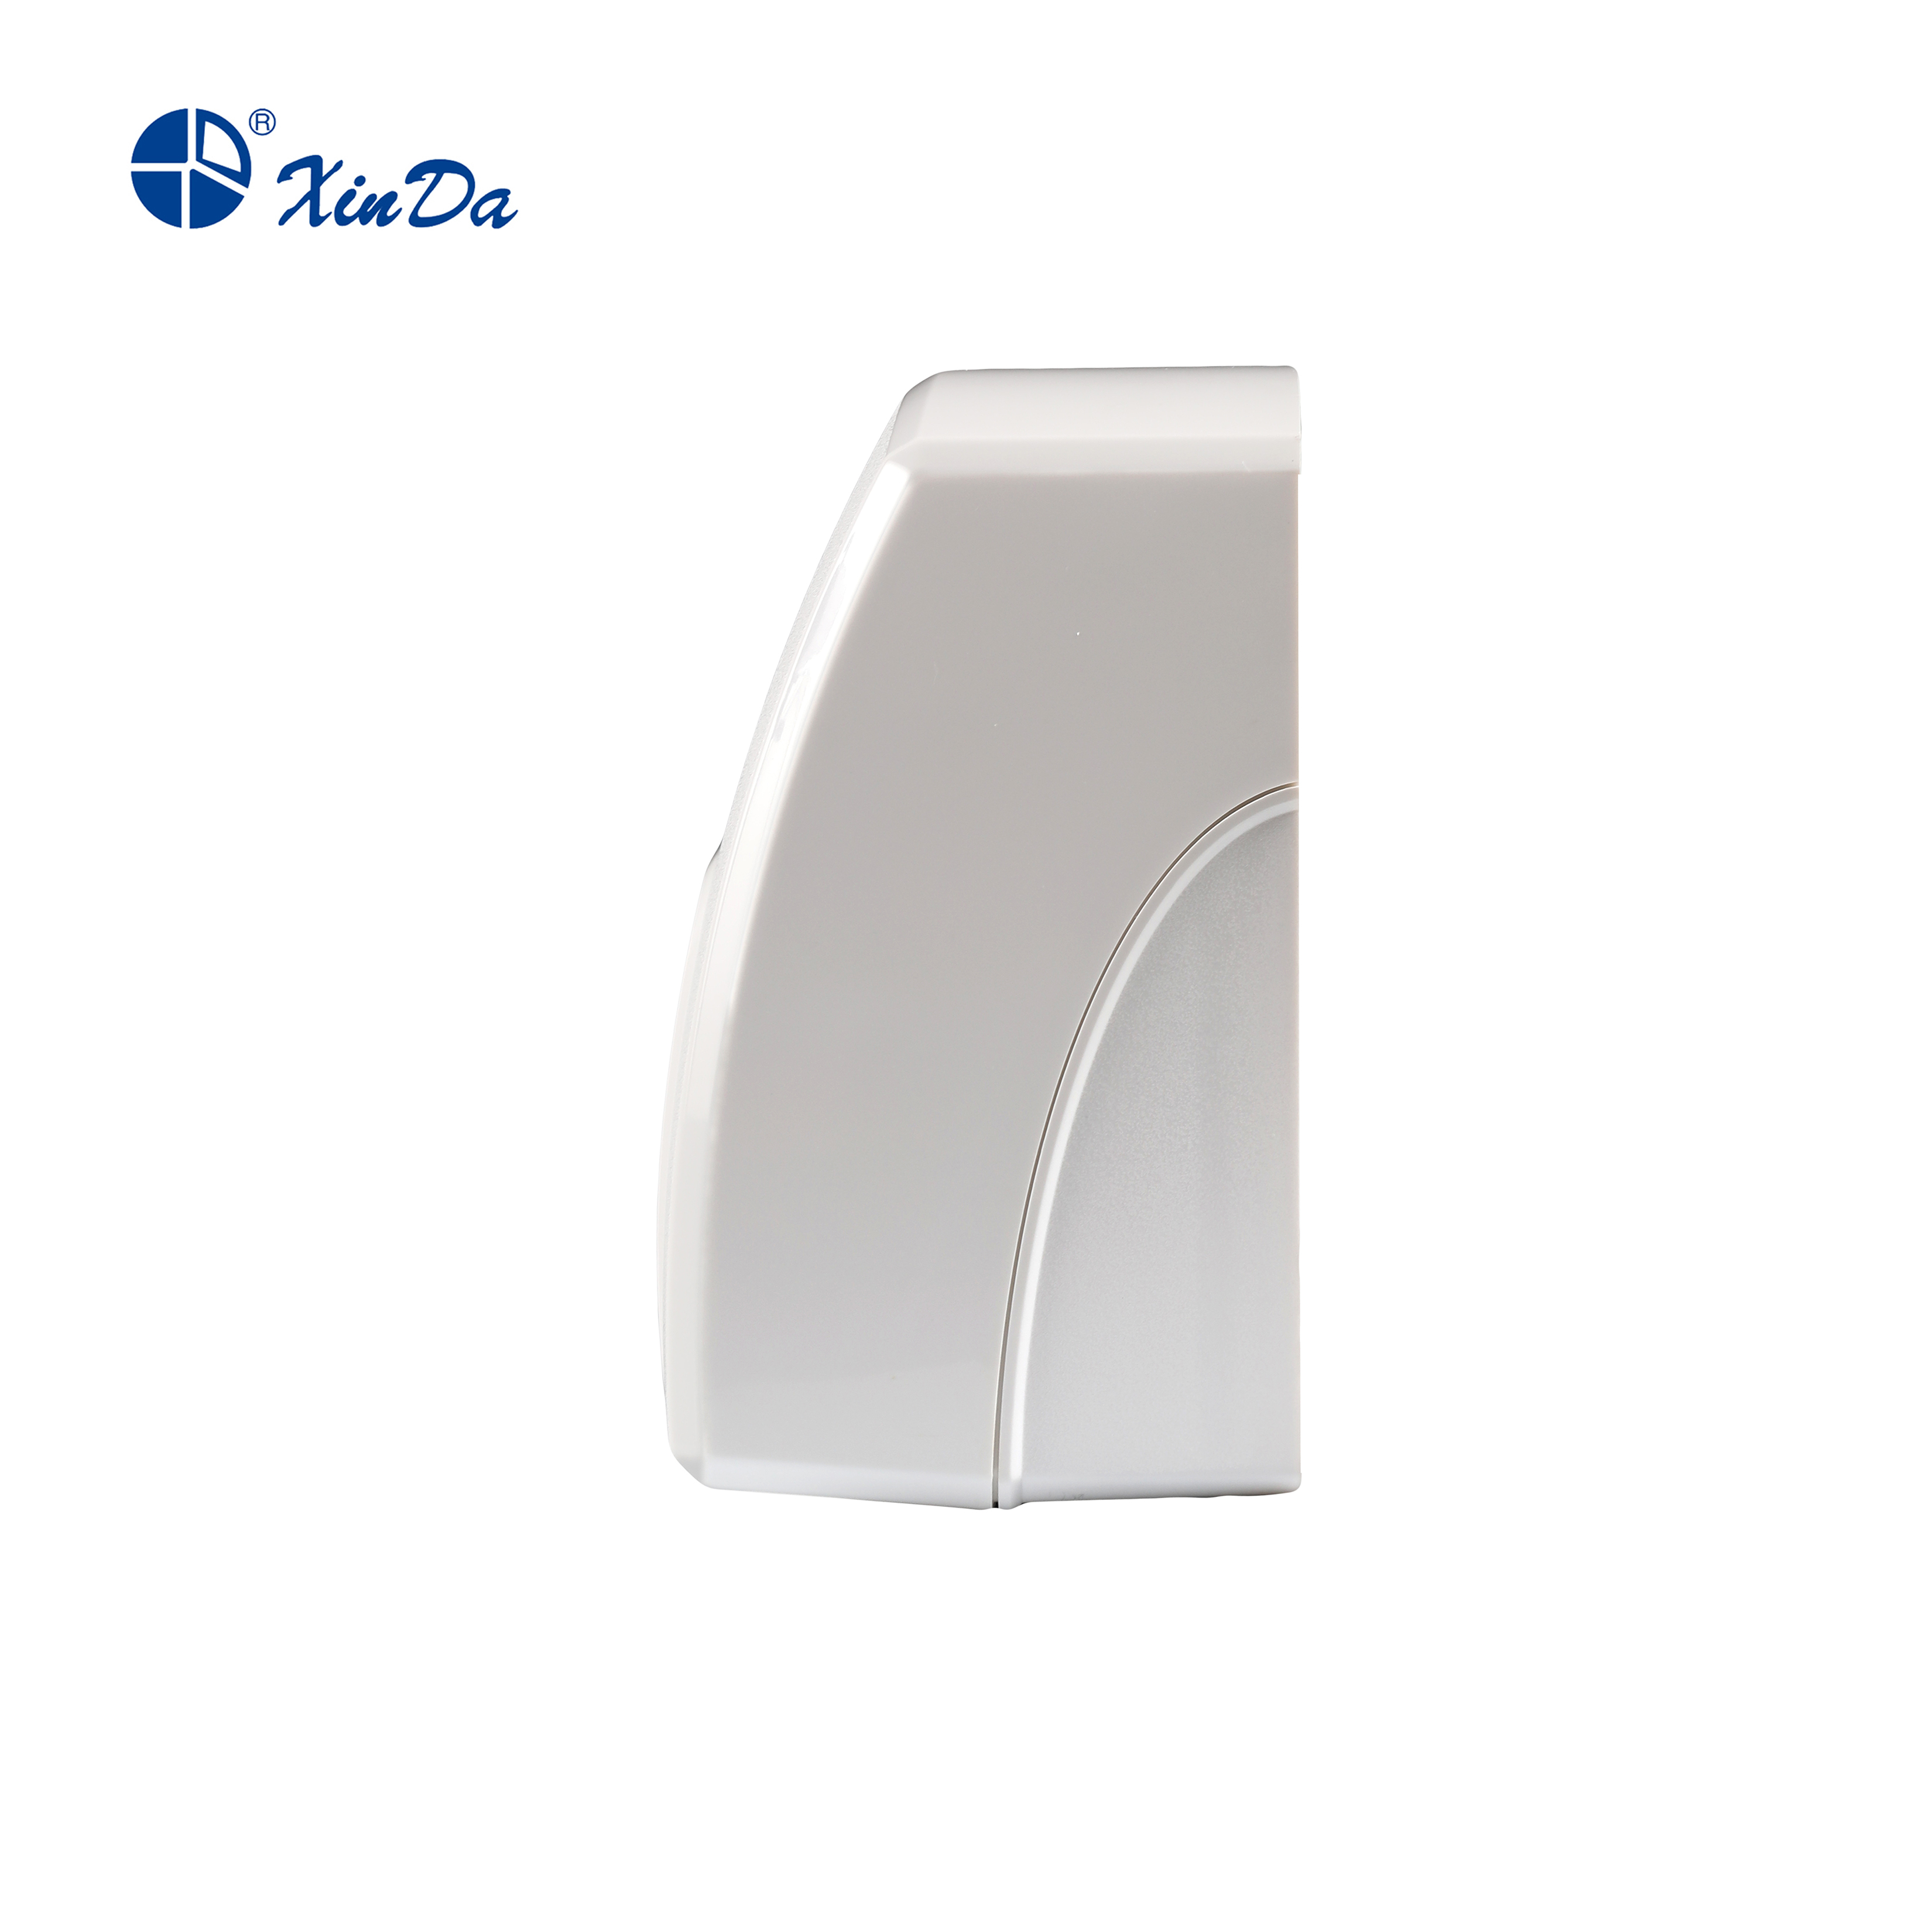 The XinDa GSQ150 China Factory Sell Automatic ABS Plastic Hand Dryers Low Noise Hand Dryer